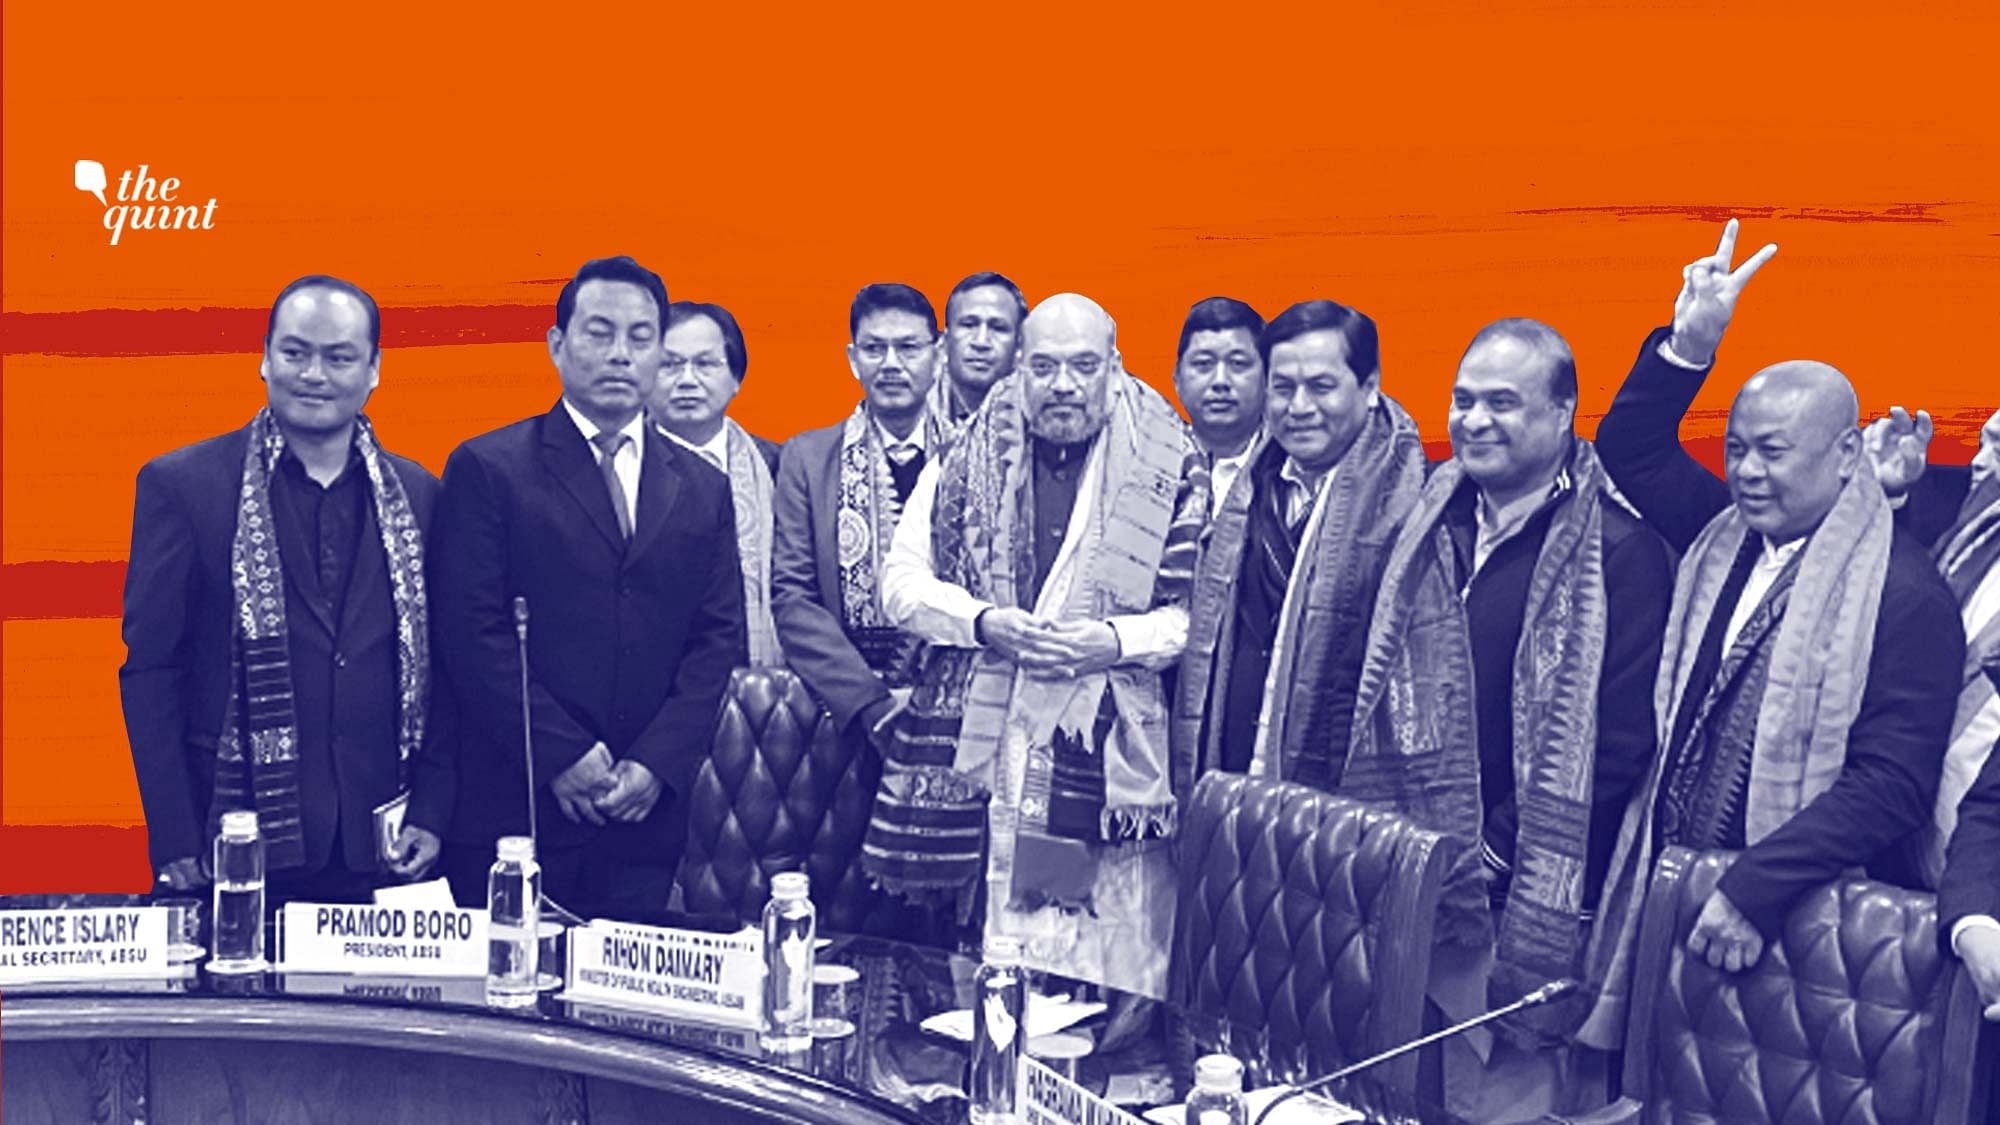 Image of Amit Shah and other signatories to the 2020 Bodo Accord used for representational purposes.